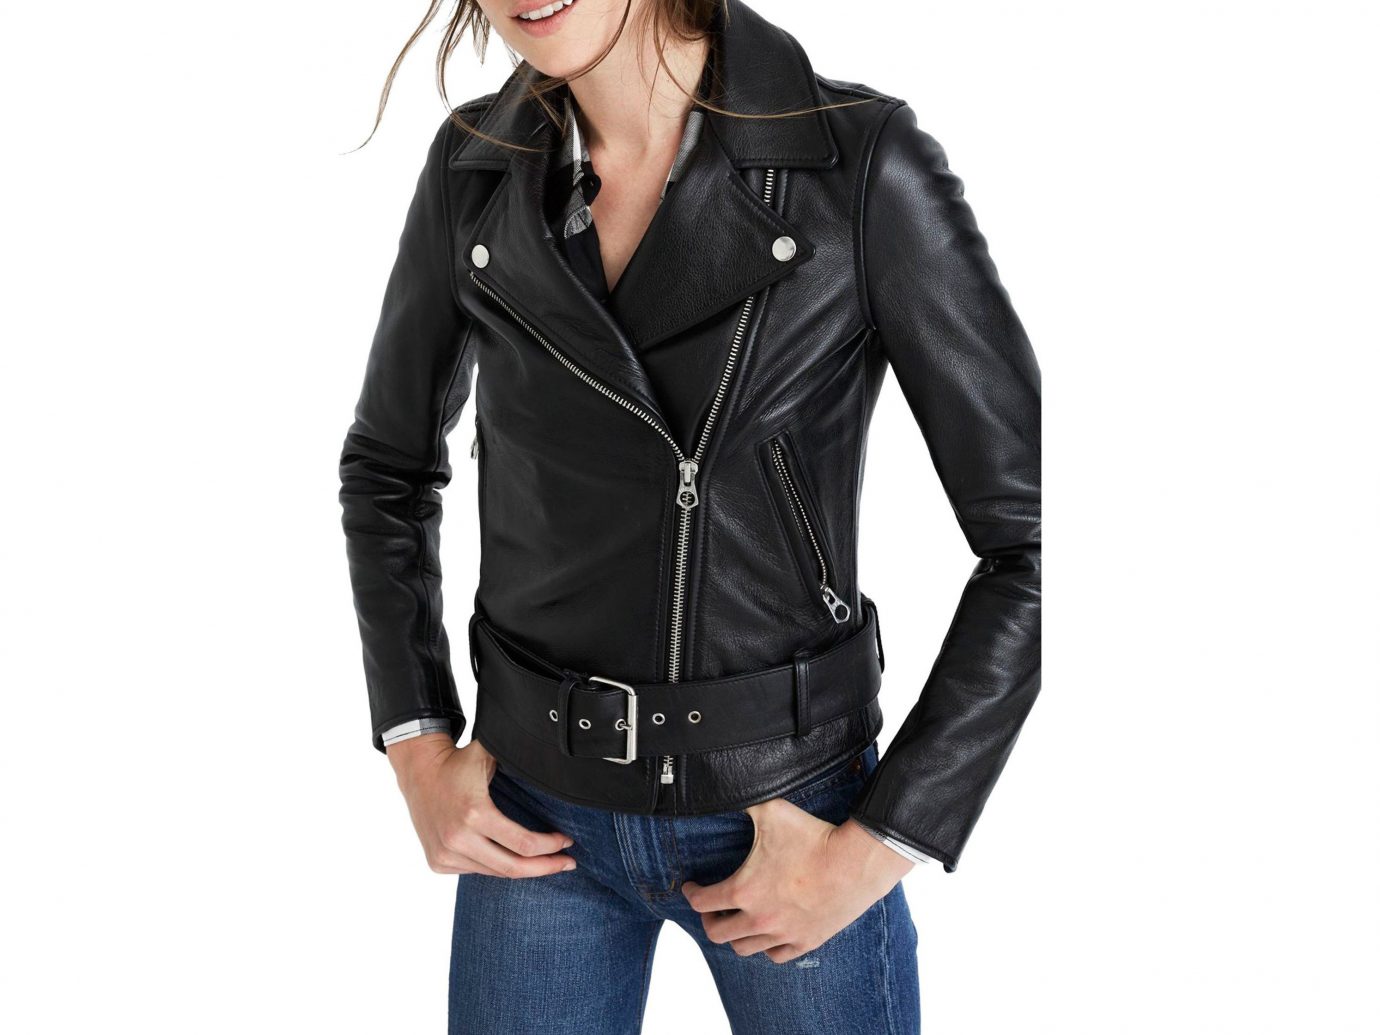 Style + Design person woman jacket clothing leather wearing leather jacket posing suit outerwear textile sleeve coat collar material lady dressed beautiful